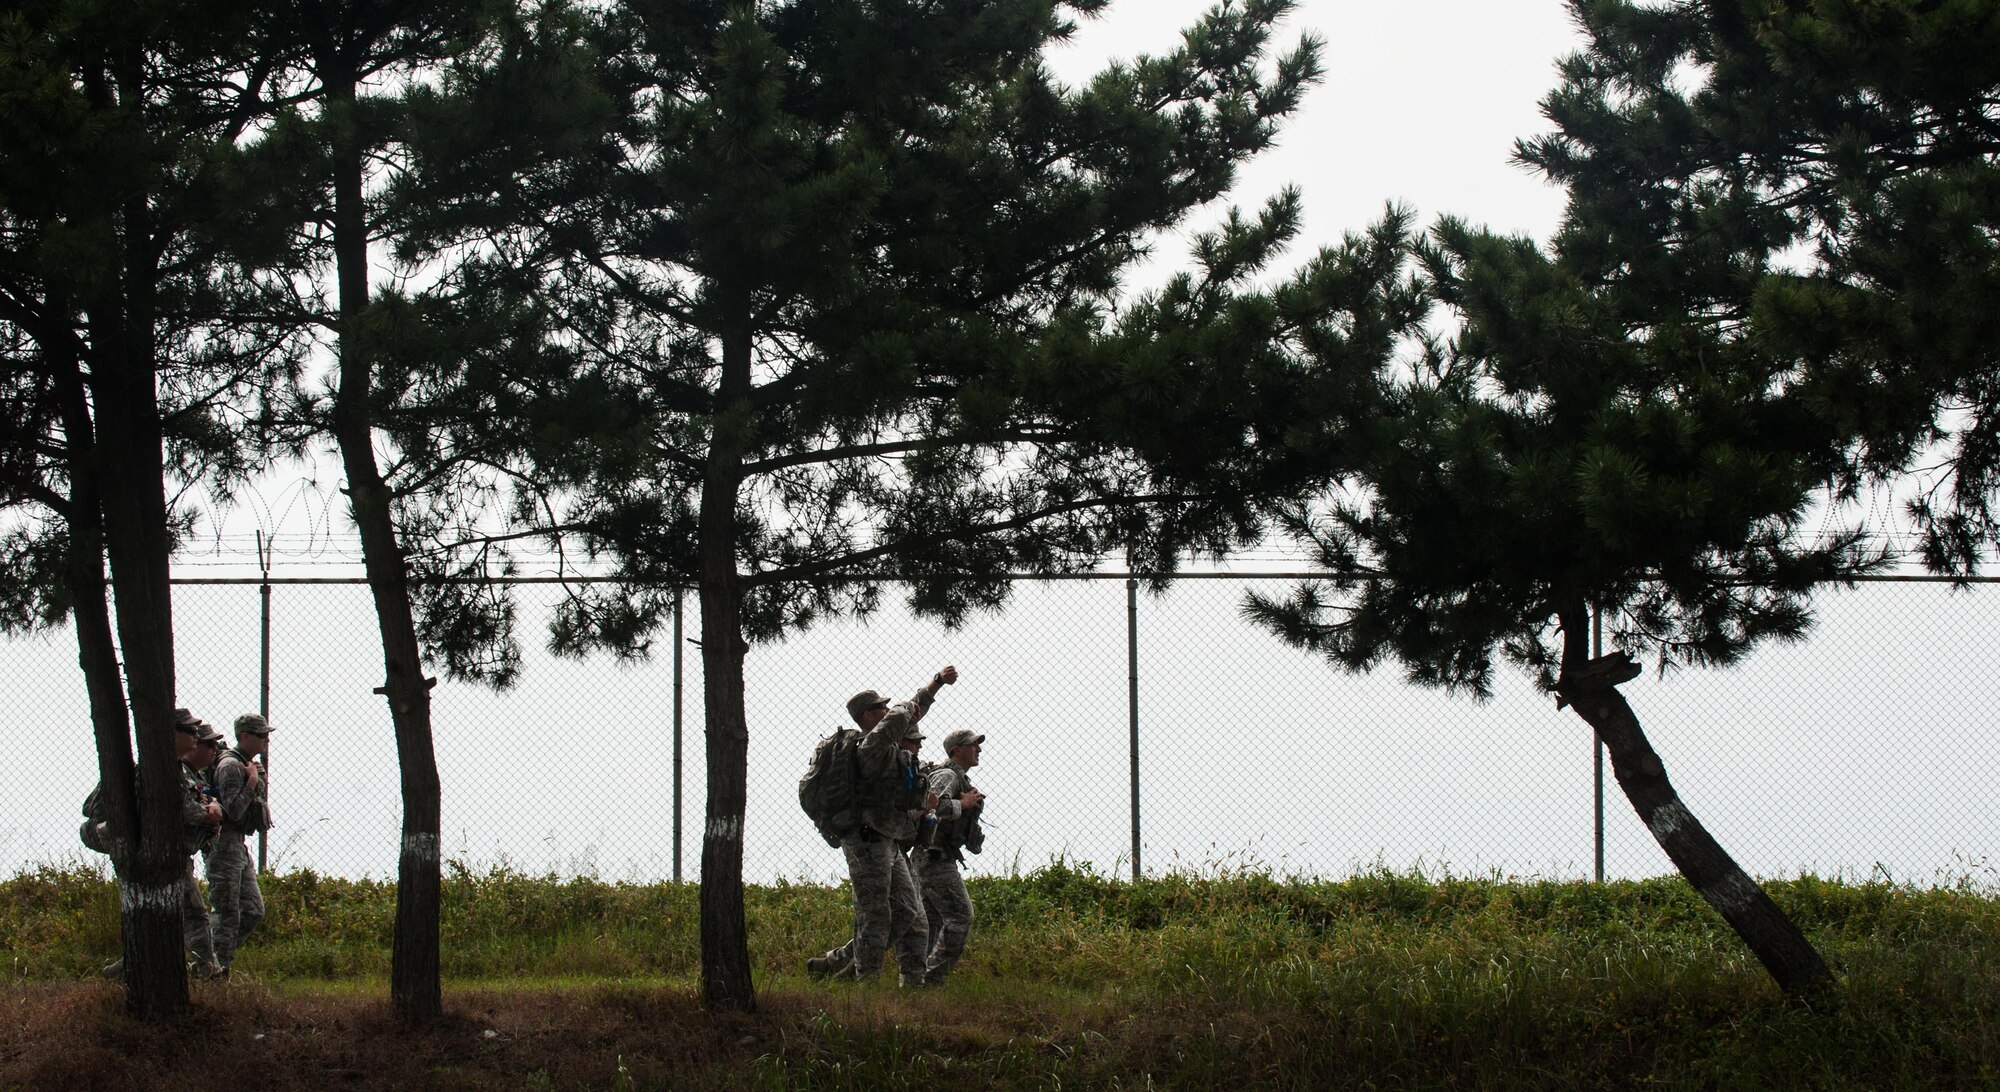 Airmen from the 8th Fighter Wing partake in a six-mile ruck march as part of 9-11 Remembrance Day at Kunsan Air Base, Republic of Korea, Sept. 11, 2015. The day's events also included a first-responder stair climb and a 9-11 Remembrance Day Ceremony. (U.S. Air Force photo by Staff Sgt. Nick Wilson/Released)